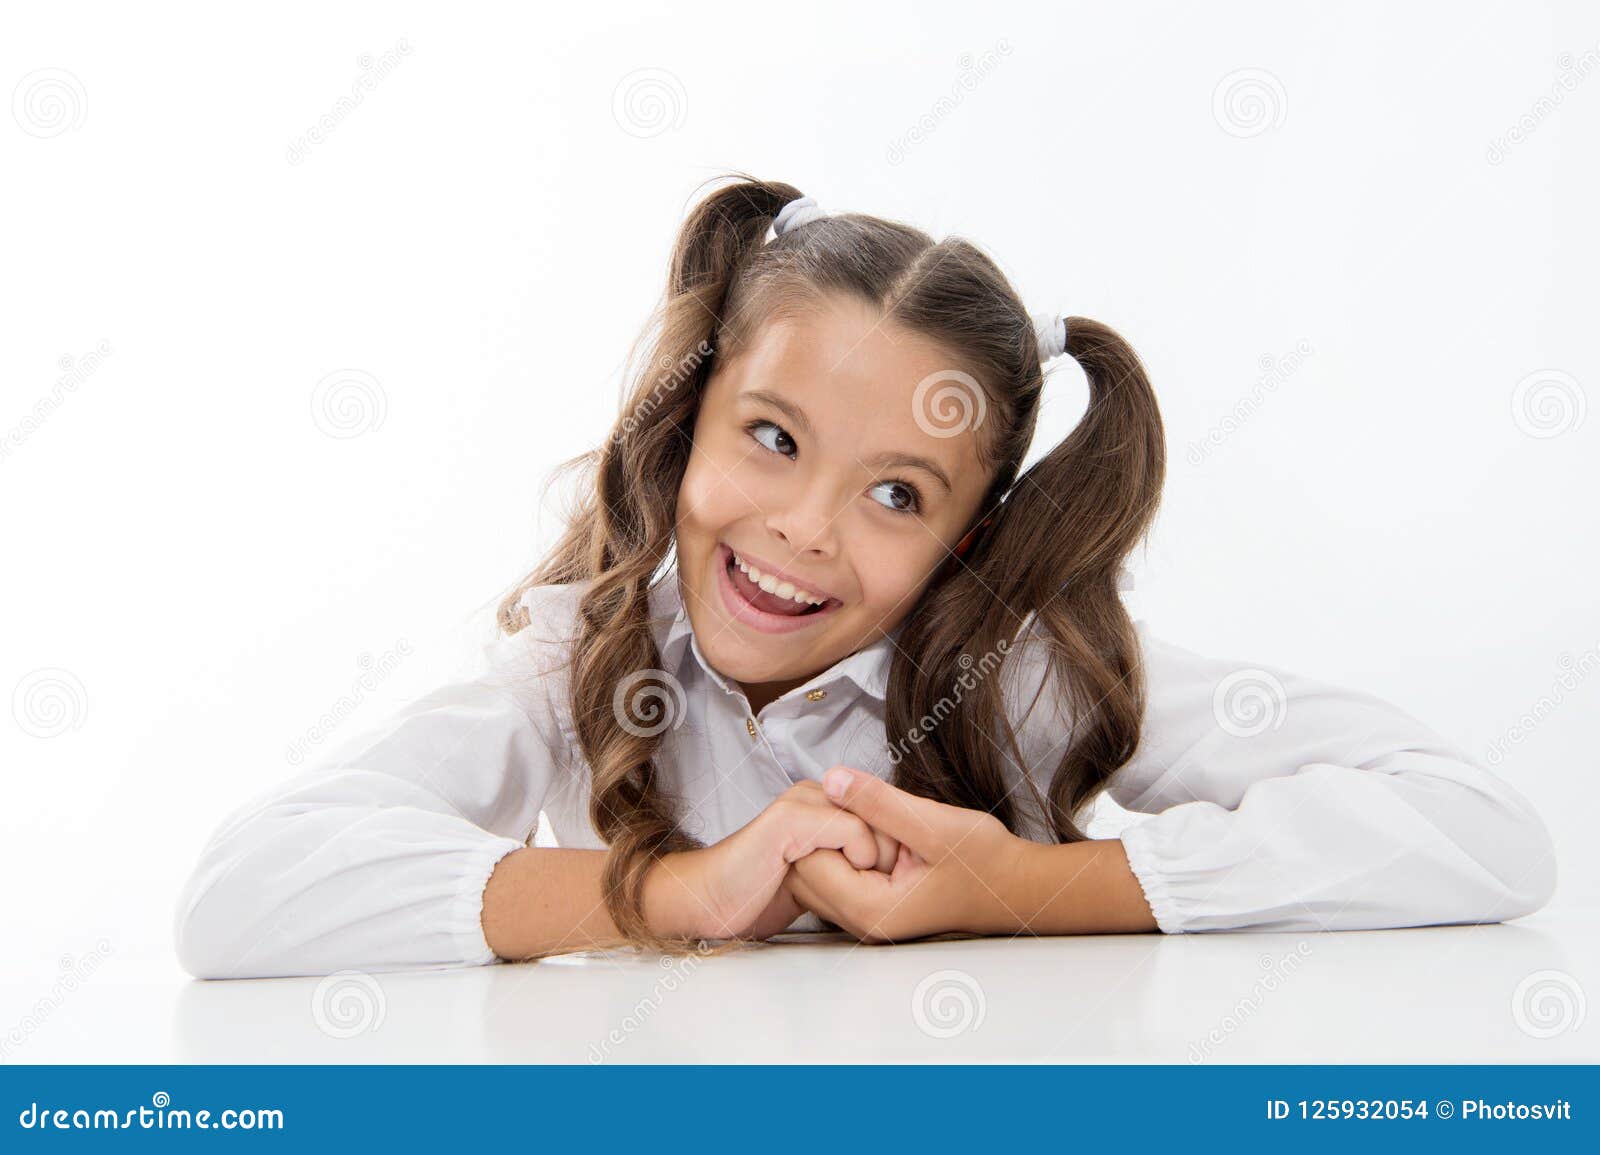 Perfect Schoolgirl with Tidy Fancy Hair. School Hairstyle Ultimate Top  List. Prepare Kid First School Day Stock Photo - Image of duty, hair:  125932054